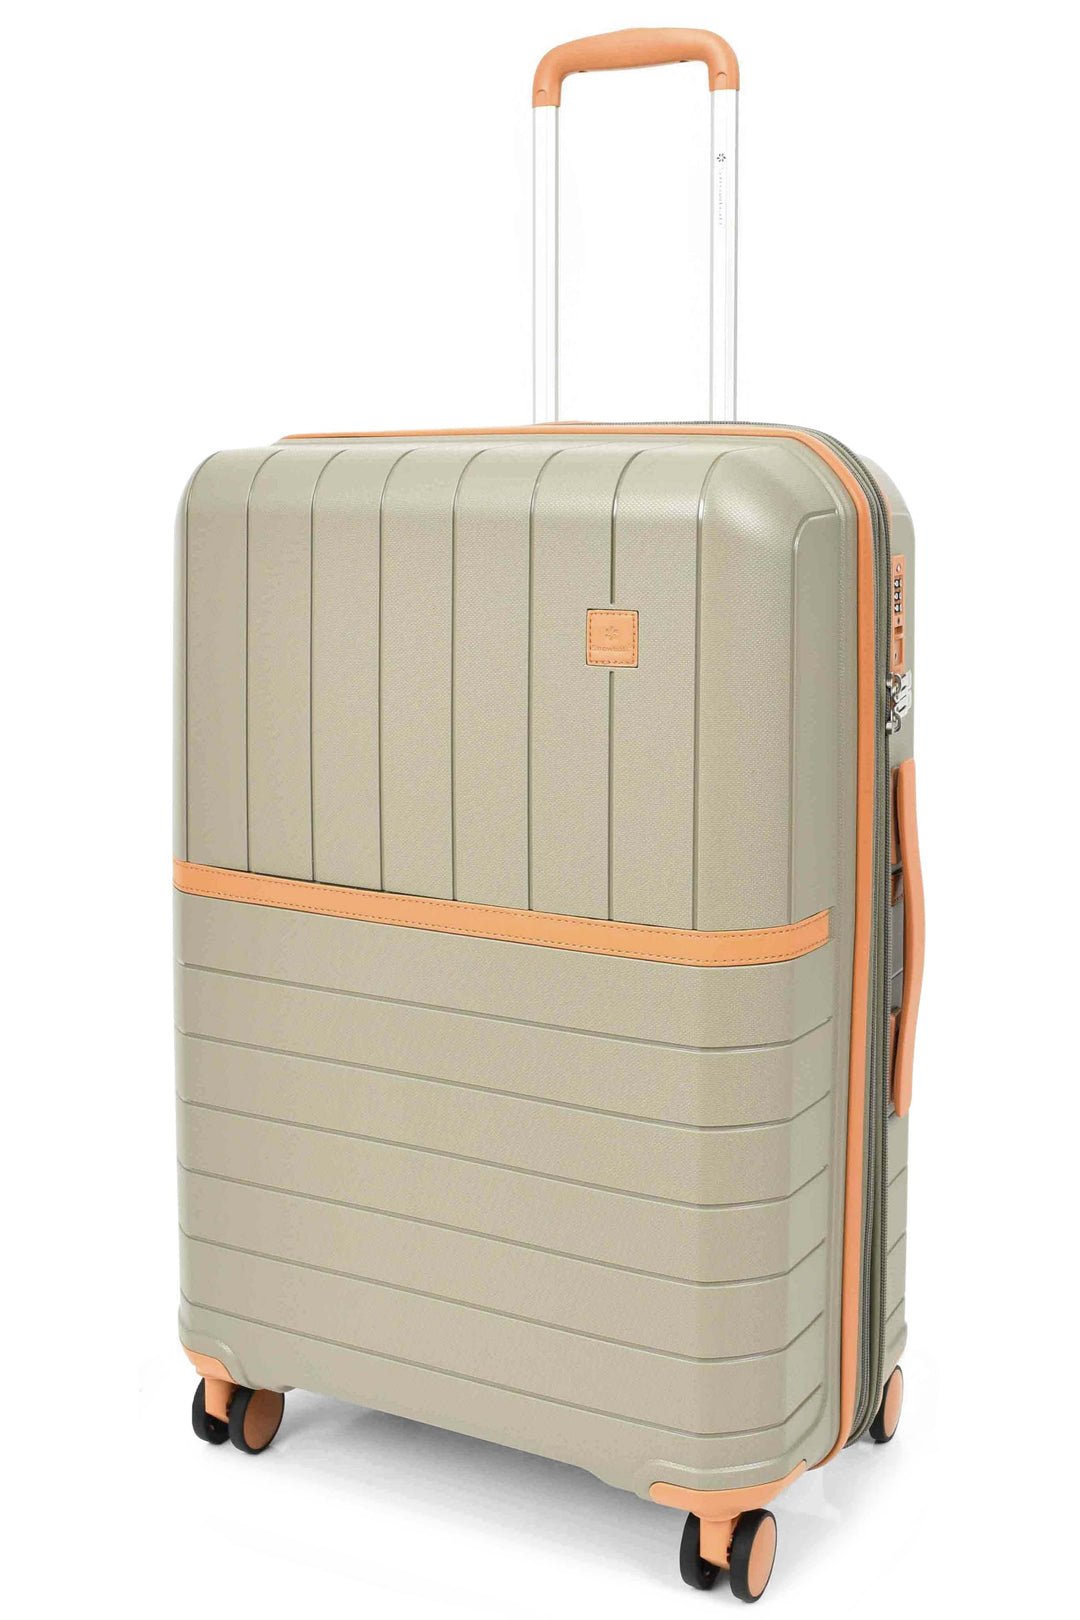 Excursion Hard Shell Suitcase 6